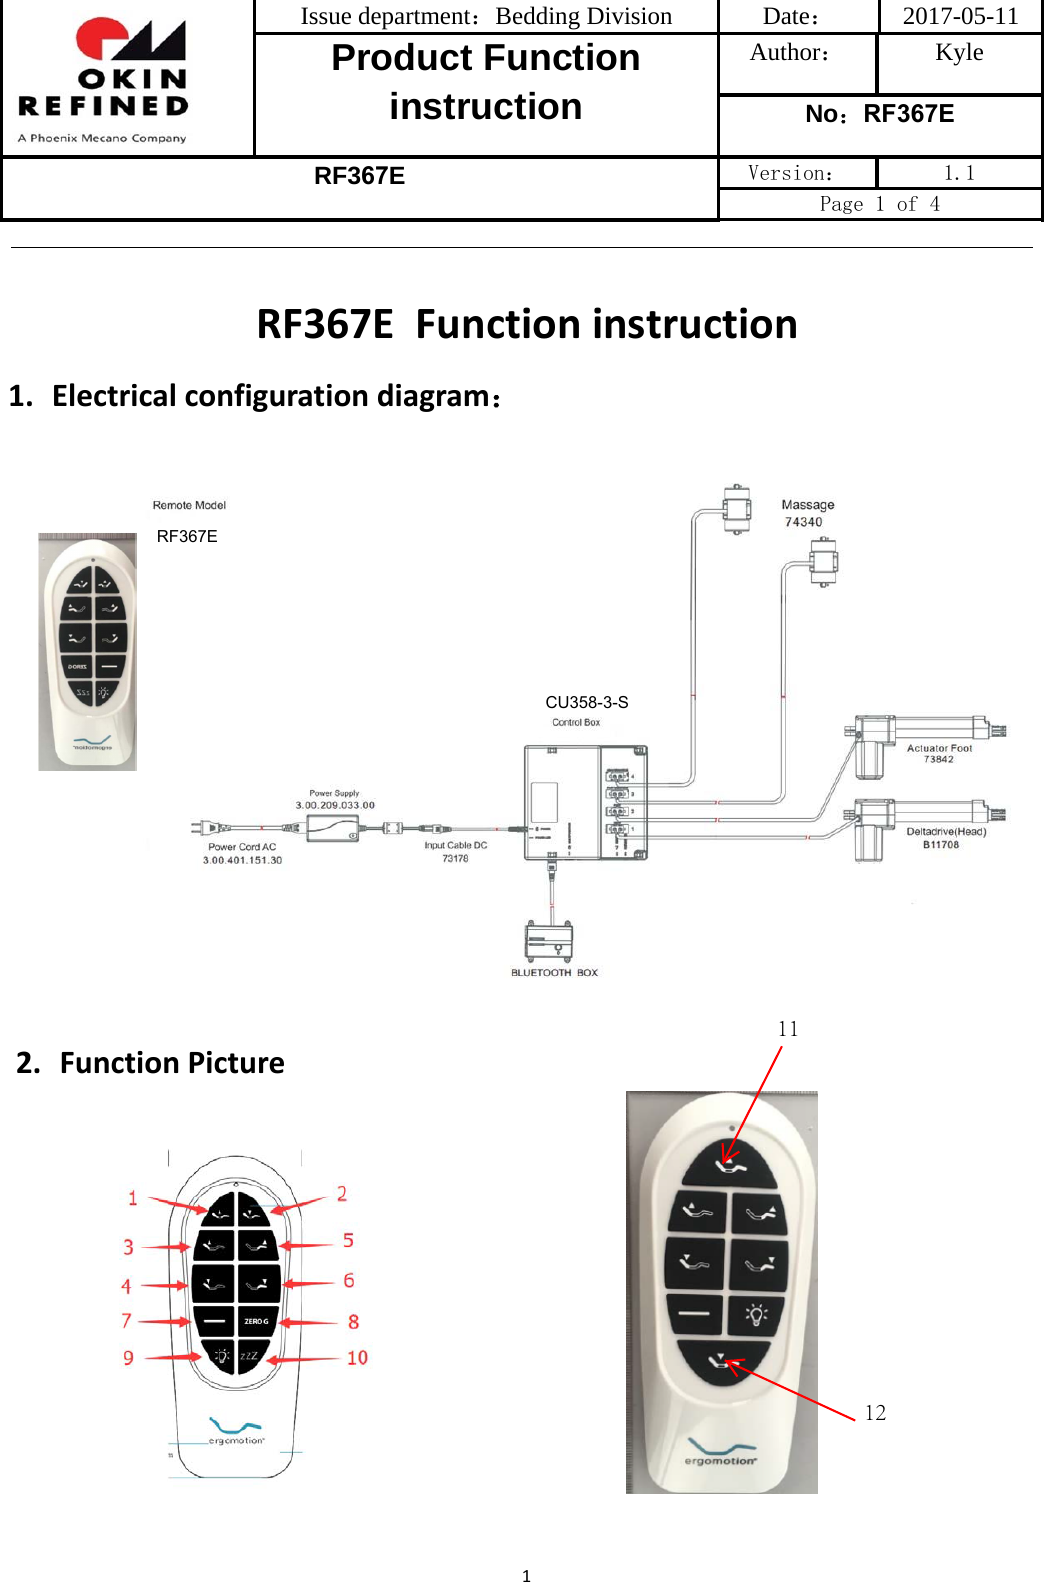 Issue department：Bedding Division  Date： 2017-05-11 Product Function instruction Author： Kyle No：RF367E RF367E Version：  1.1 Page 1 of 4 1RF367E Functioninstruction1. Electricalconfigurationdiagram：2. FunctionPictureRF367ECU358-3-S1112